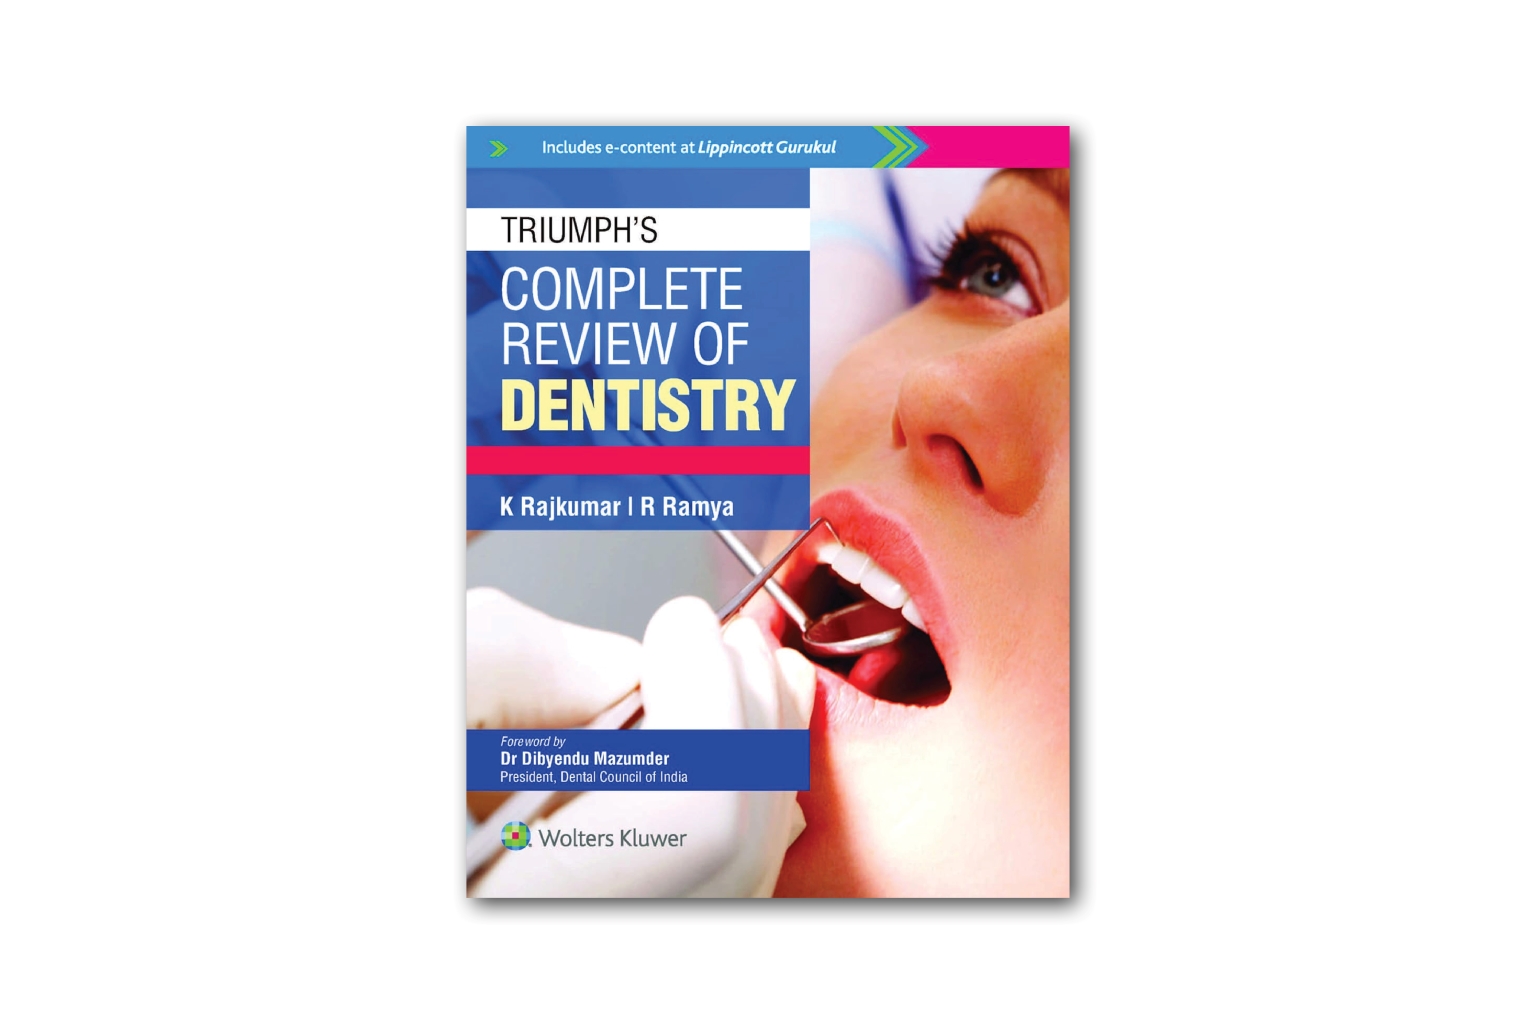 Triumph's Complete Review of Dentistry